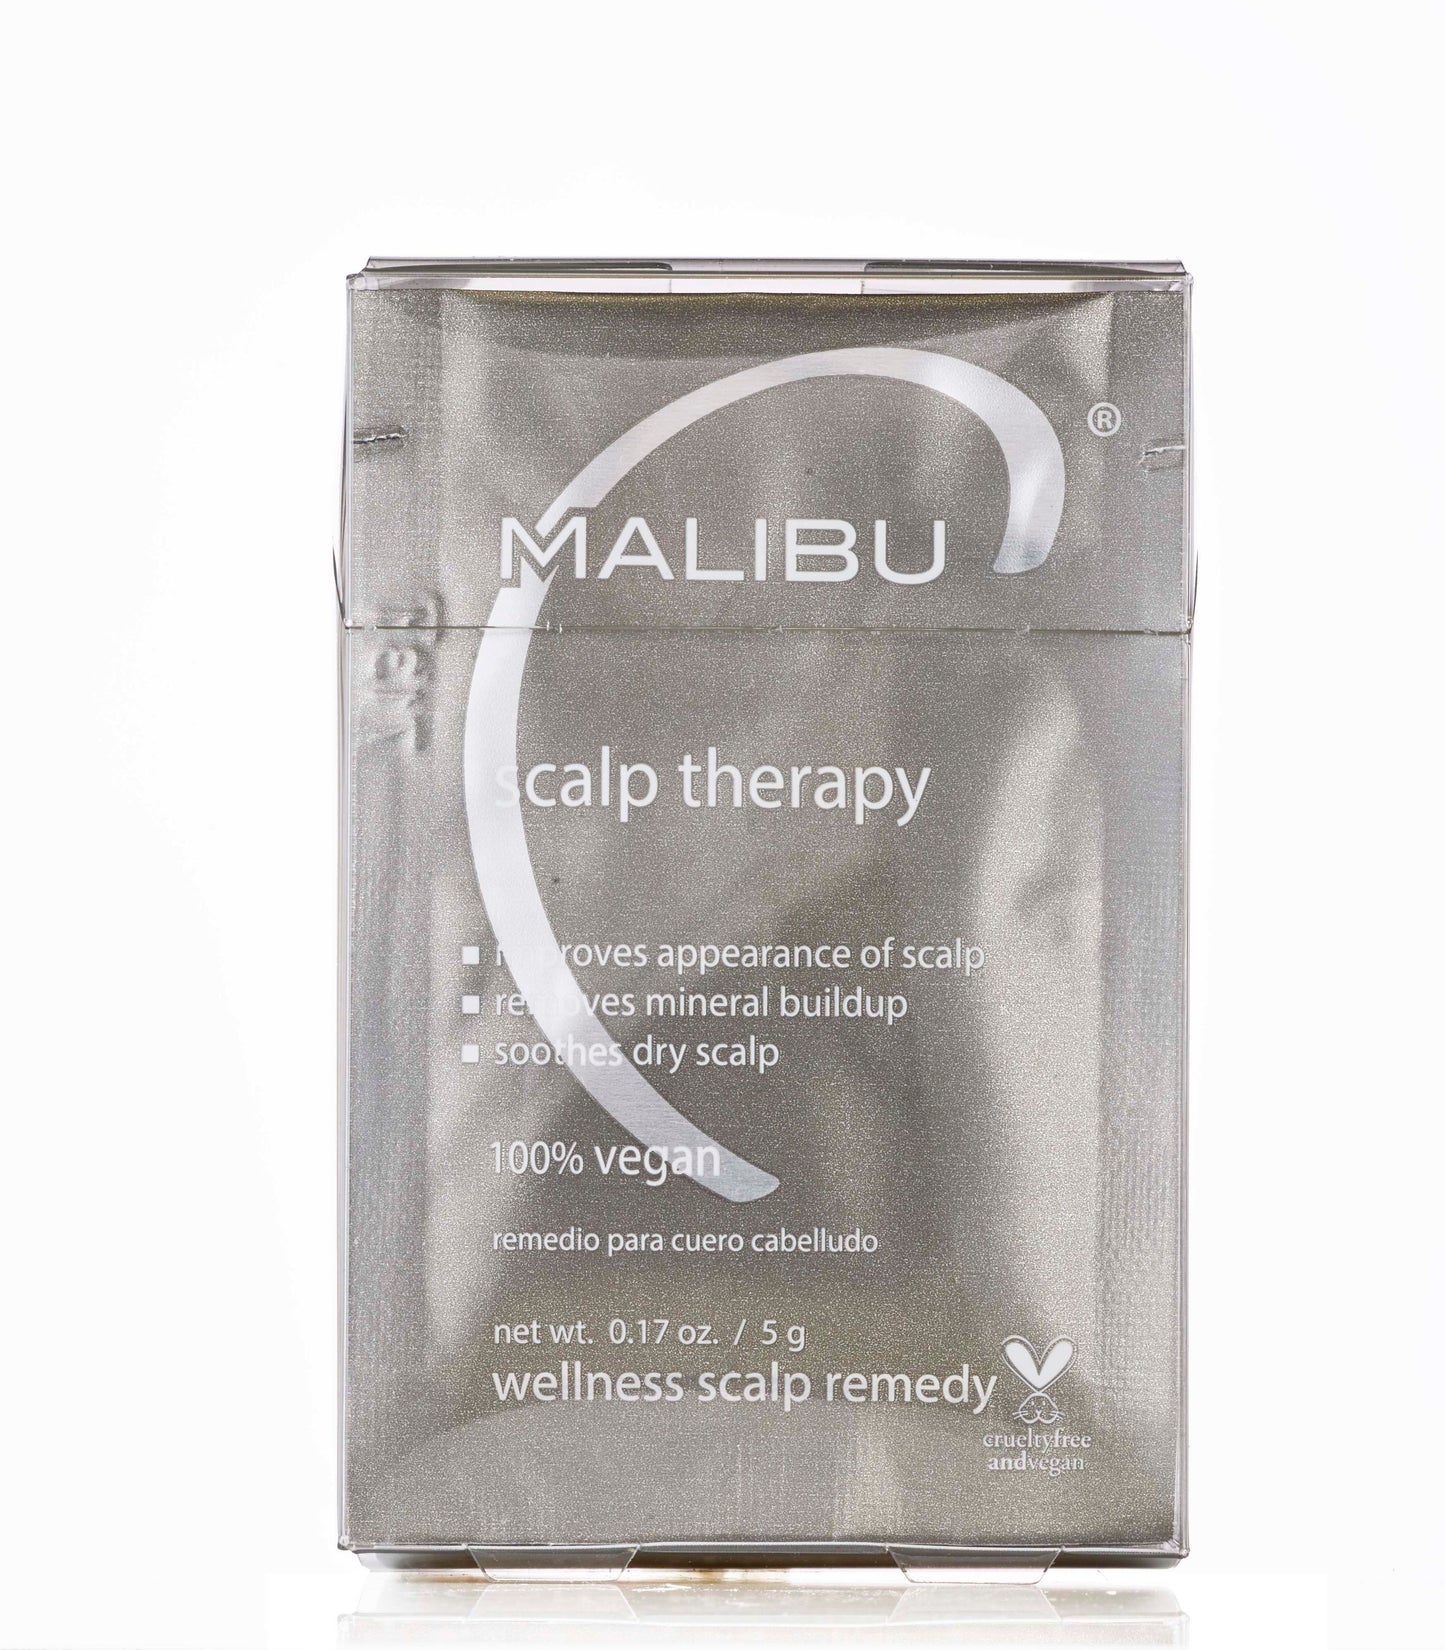 Malibu C Scalp Therapy Wellness Collection For Healthy Hair and Scalp